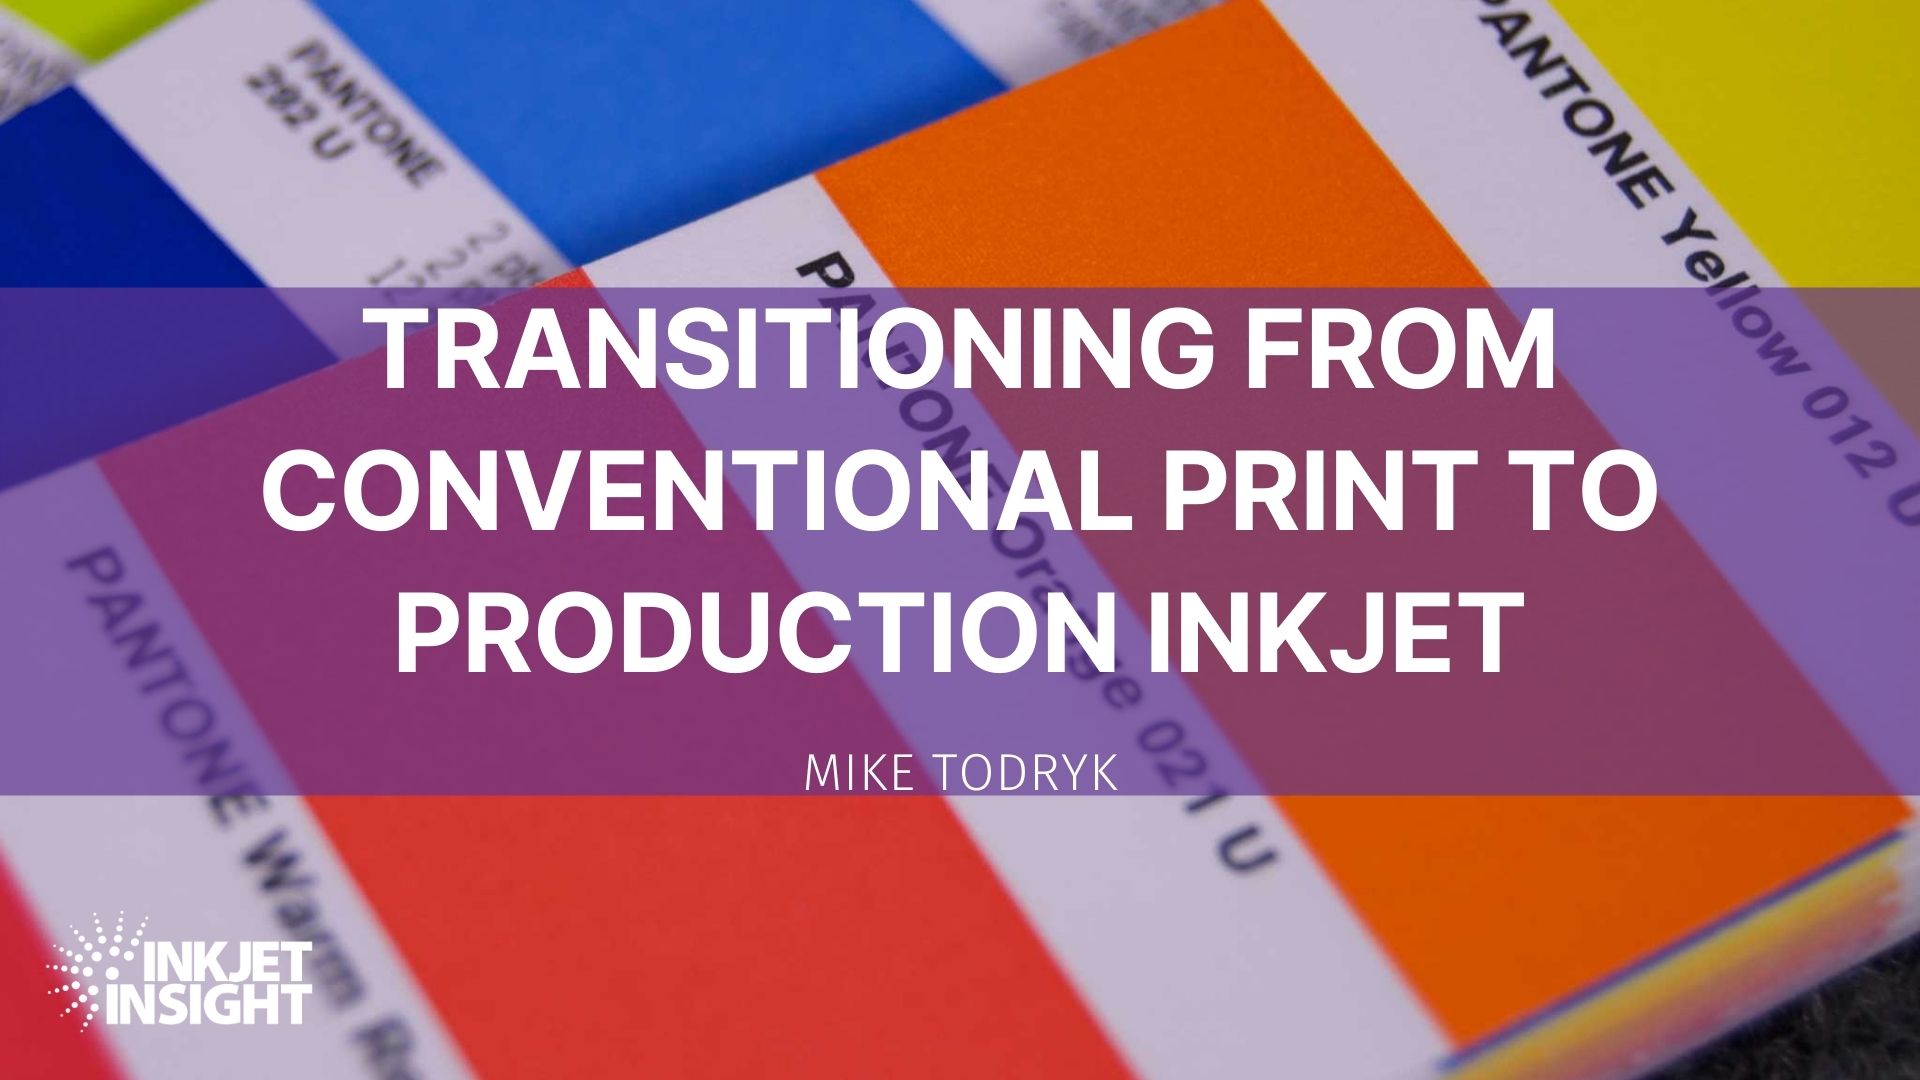 Featured image for “Transitioning From Conventional Print to Production Inkjet”